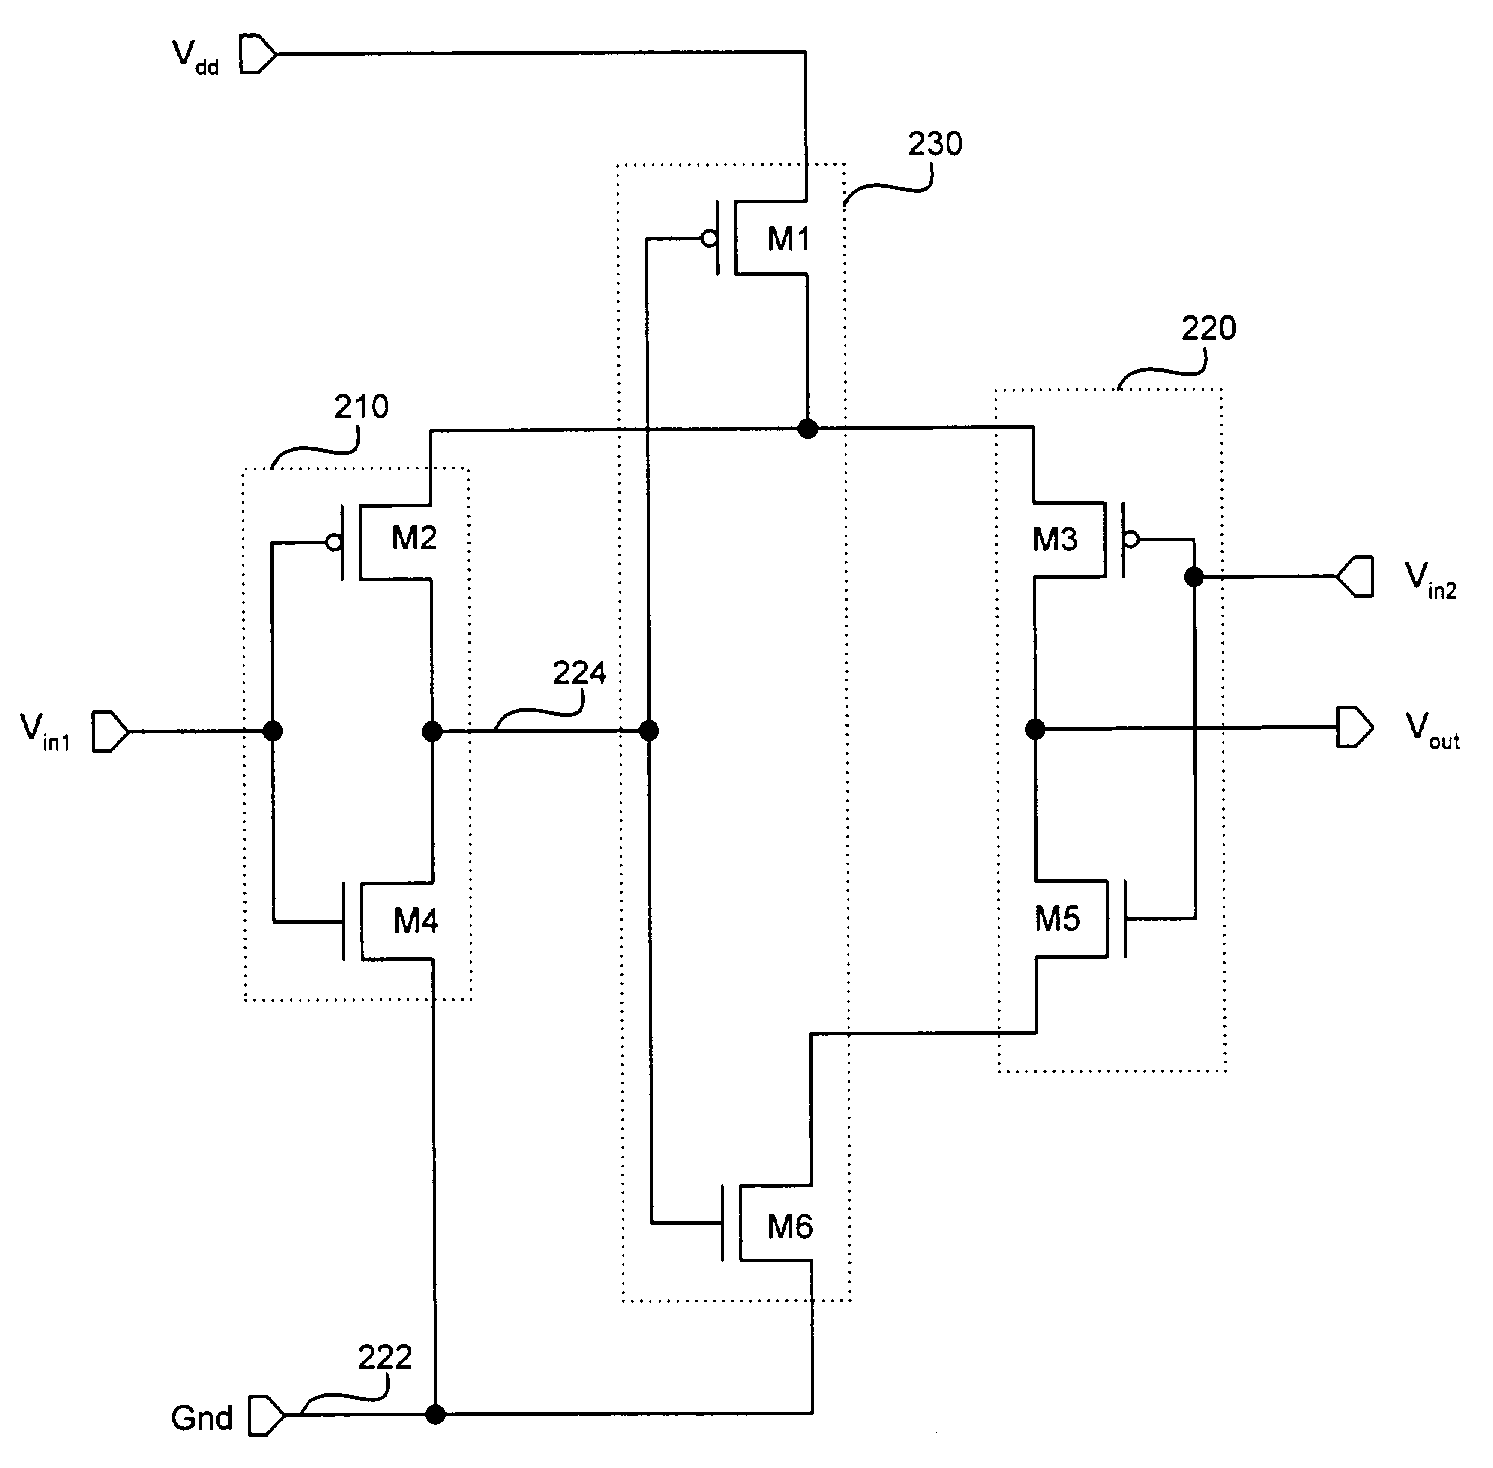 Apparatus for a differential self-biasing CMOS amplifier